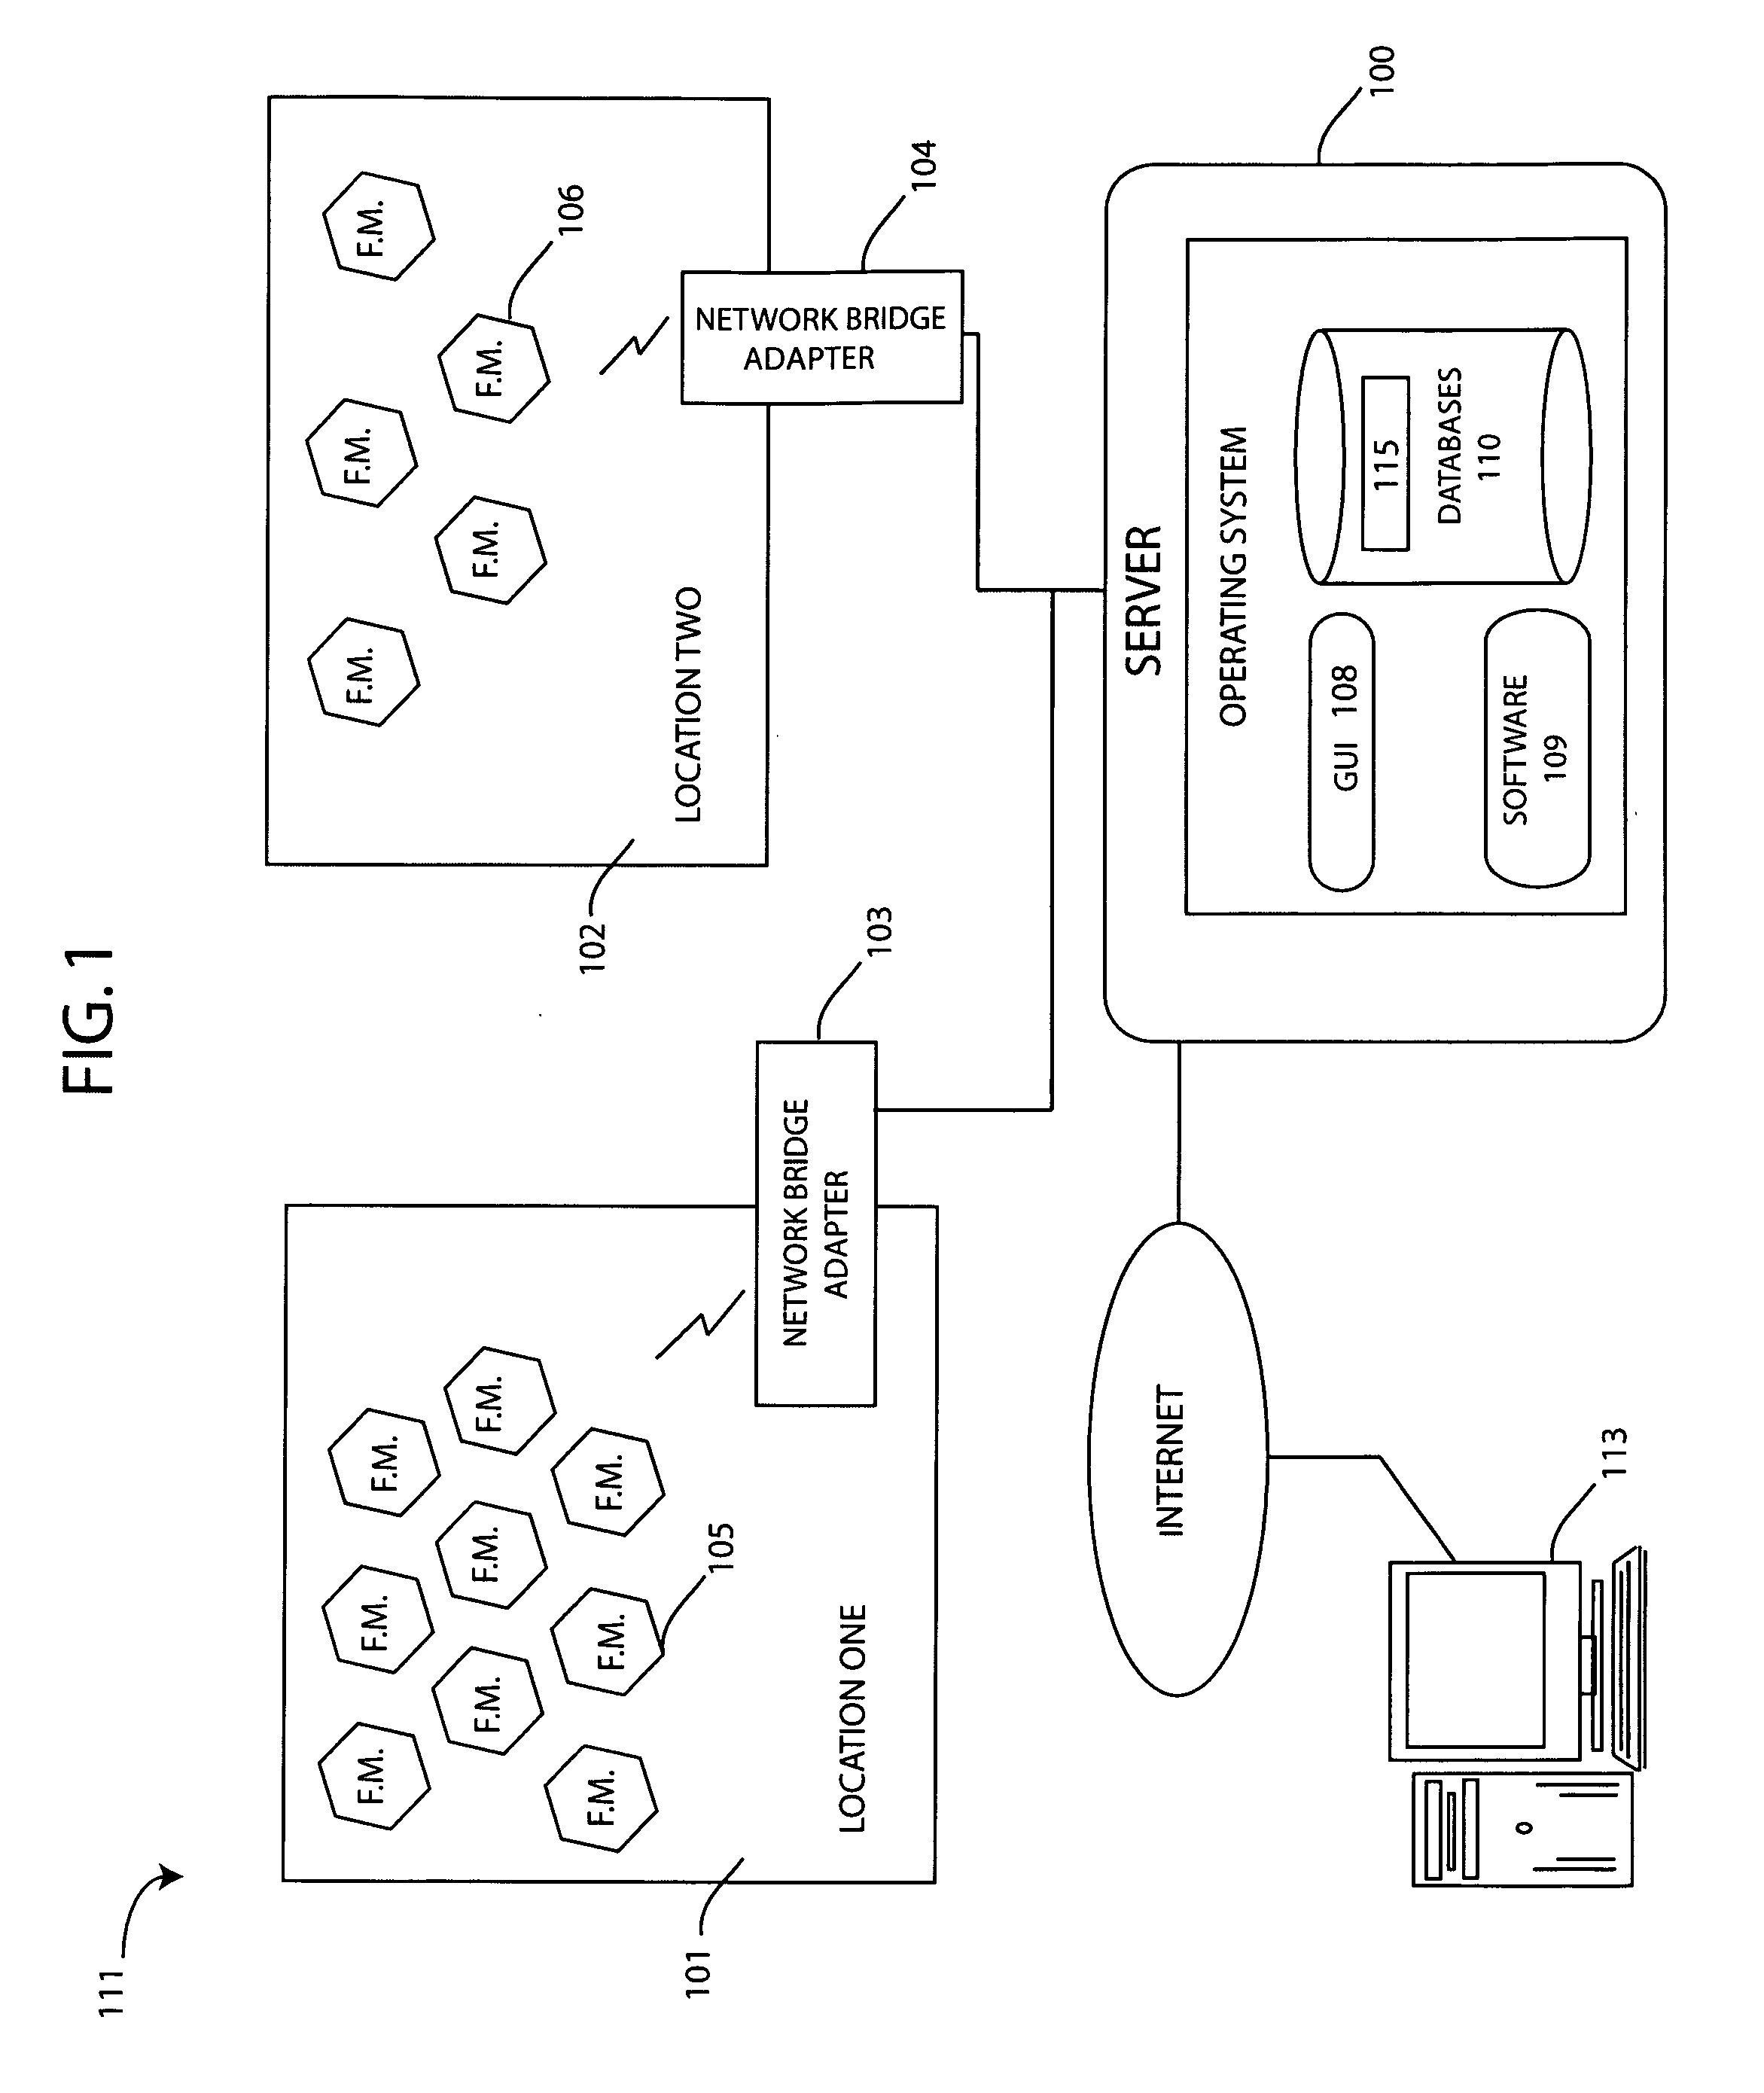 Irrigation field module matrix configured for wireless communication with a central control server